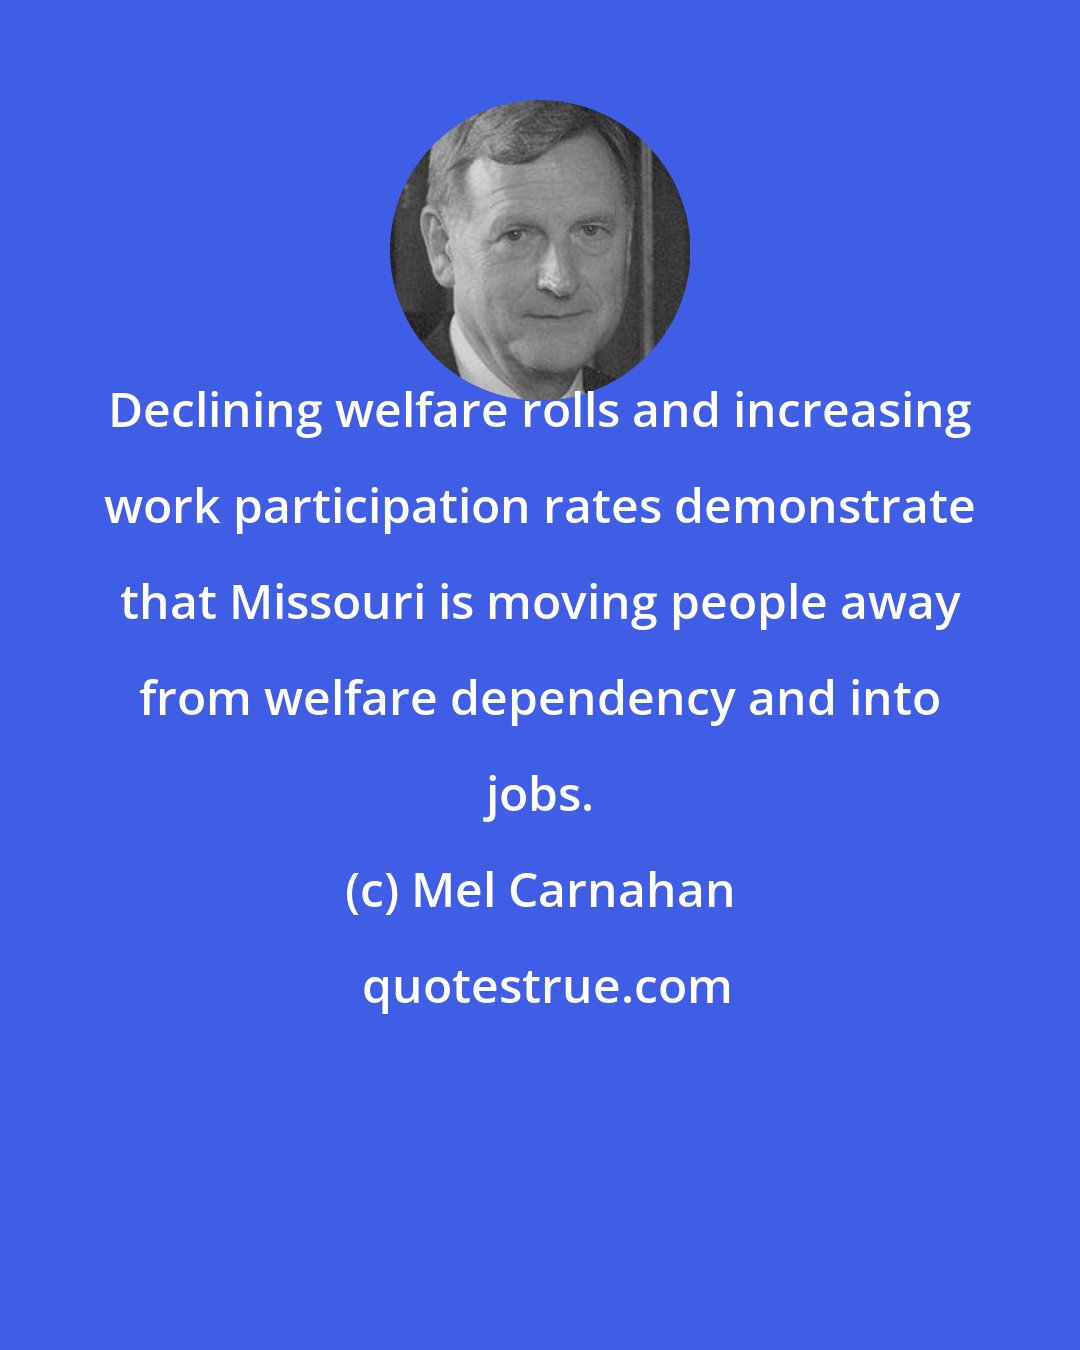 Mel Carnahan: Declining welfare rolls and increasing work participation rates demonstrate that Missouri is moving people away from welfare dependency and into jobs.